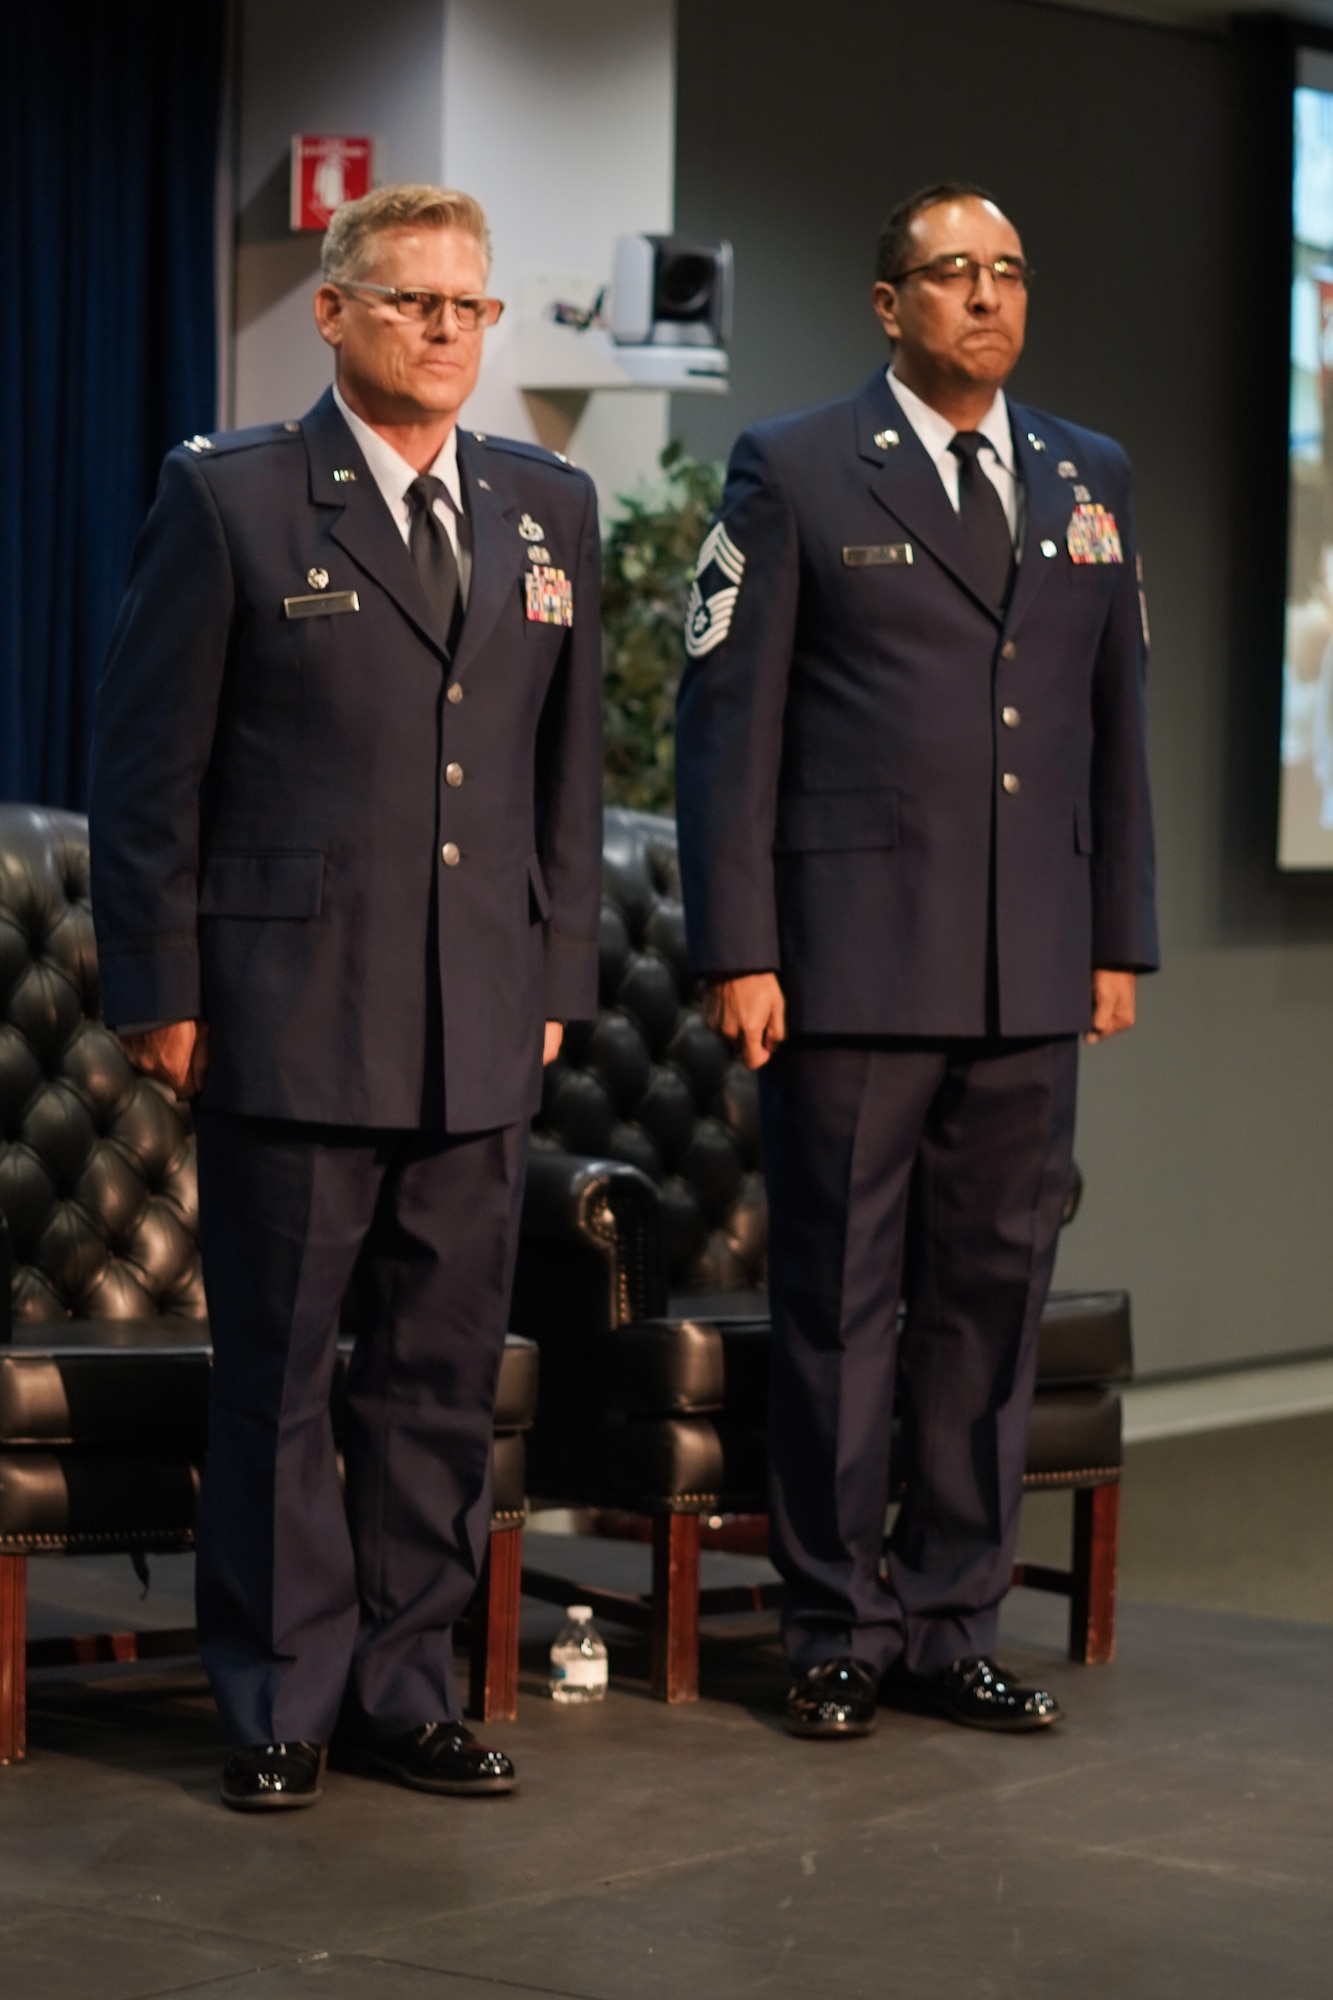 CMSgt. Glen S. Jimenez, Business Administration Functional Area Manager 349th Air Mobility Wing, Travis Air Force Base, California closed out his 33 year career with the United States Air Force in a ceremony on July 18, 2019 at Los Angeles AFB.